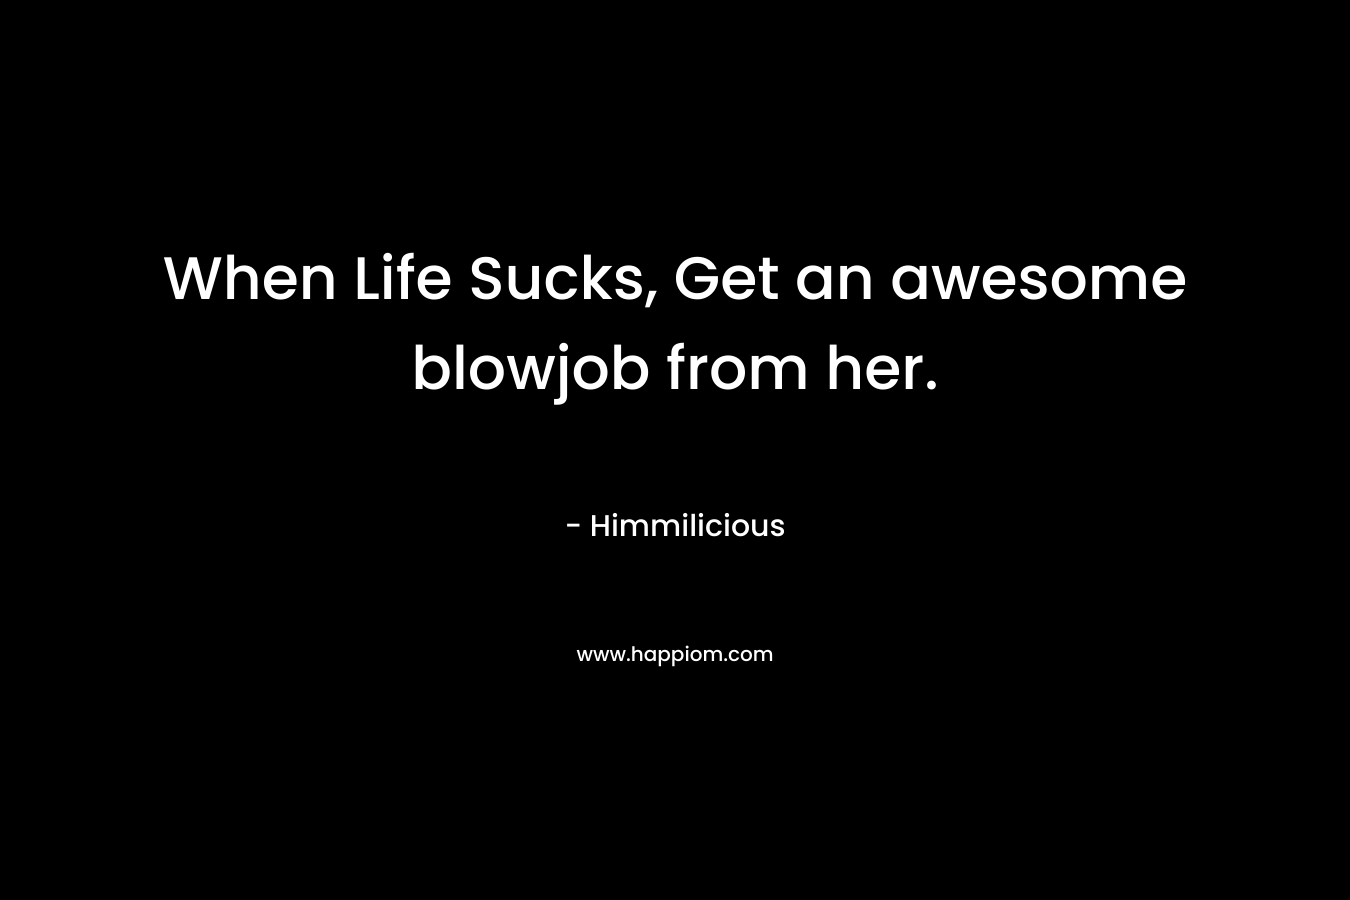 When Life Sucks, Get an awesome blowjob from her.